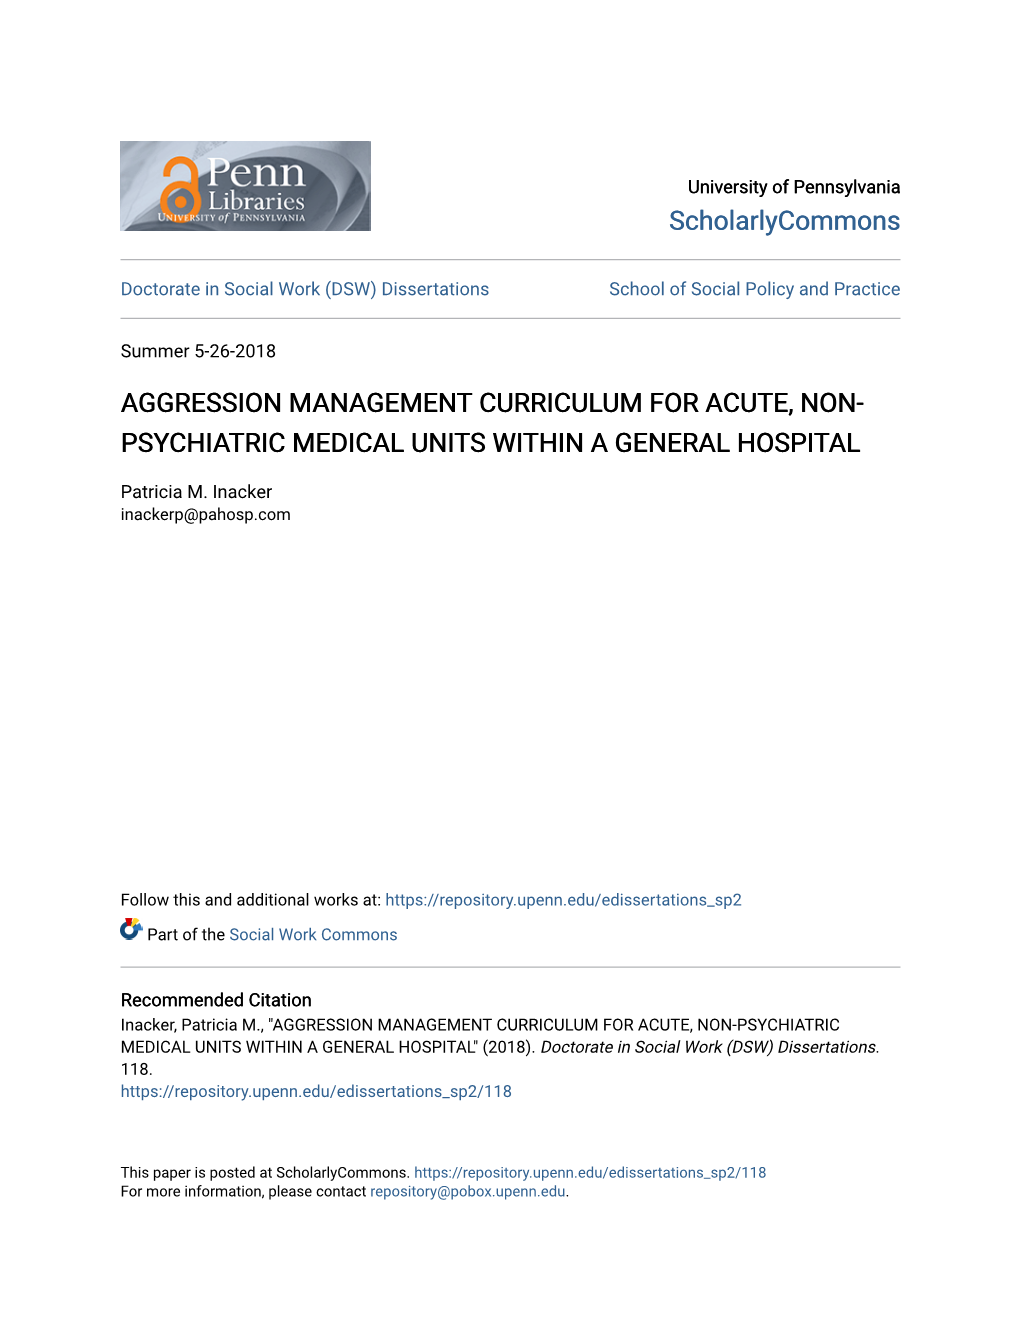 Aggression Management Curriculum for Acute, Non-Psychiatric Medical Units Within a General Hospital" (2018)